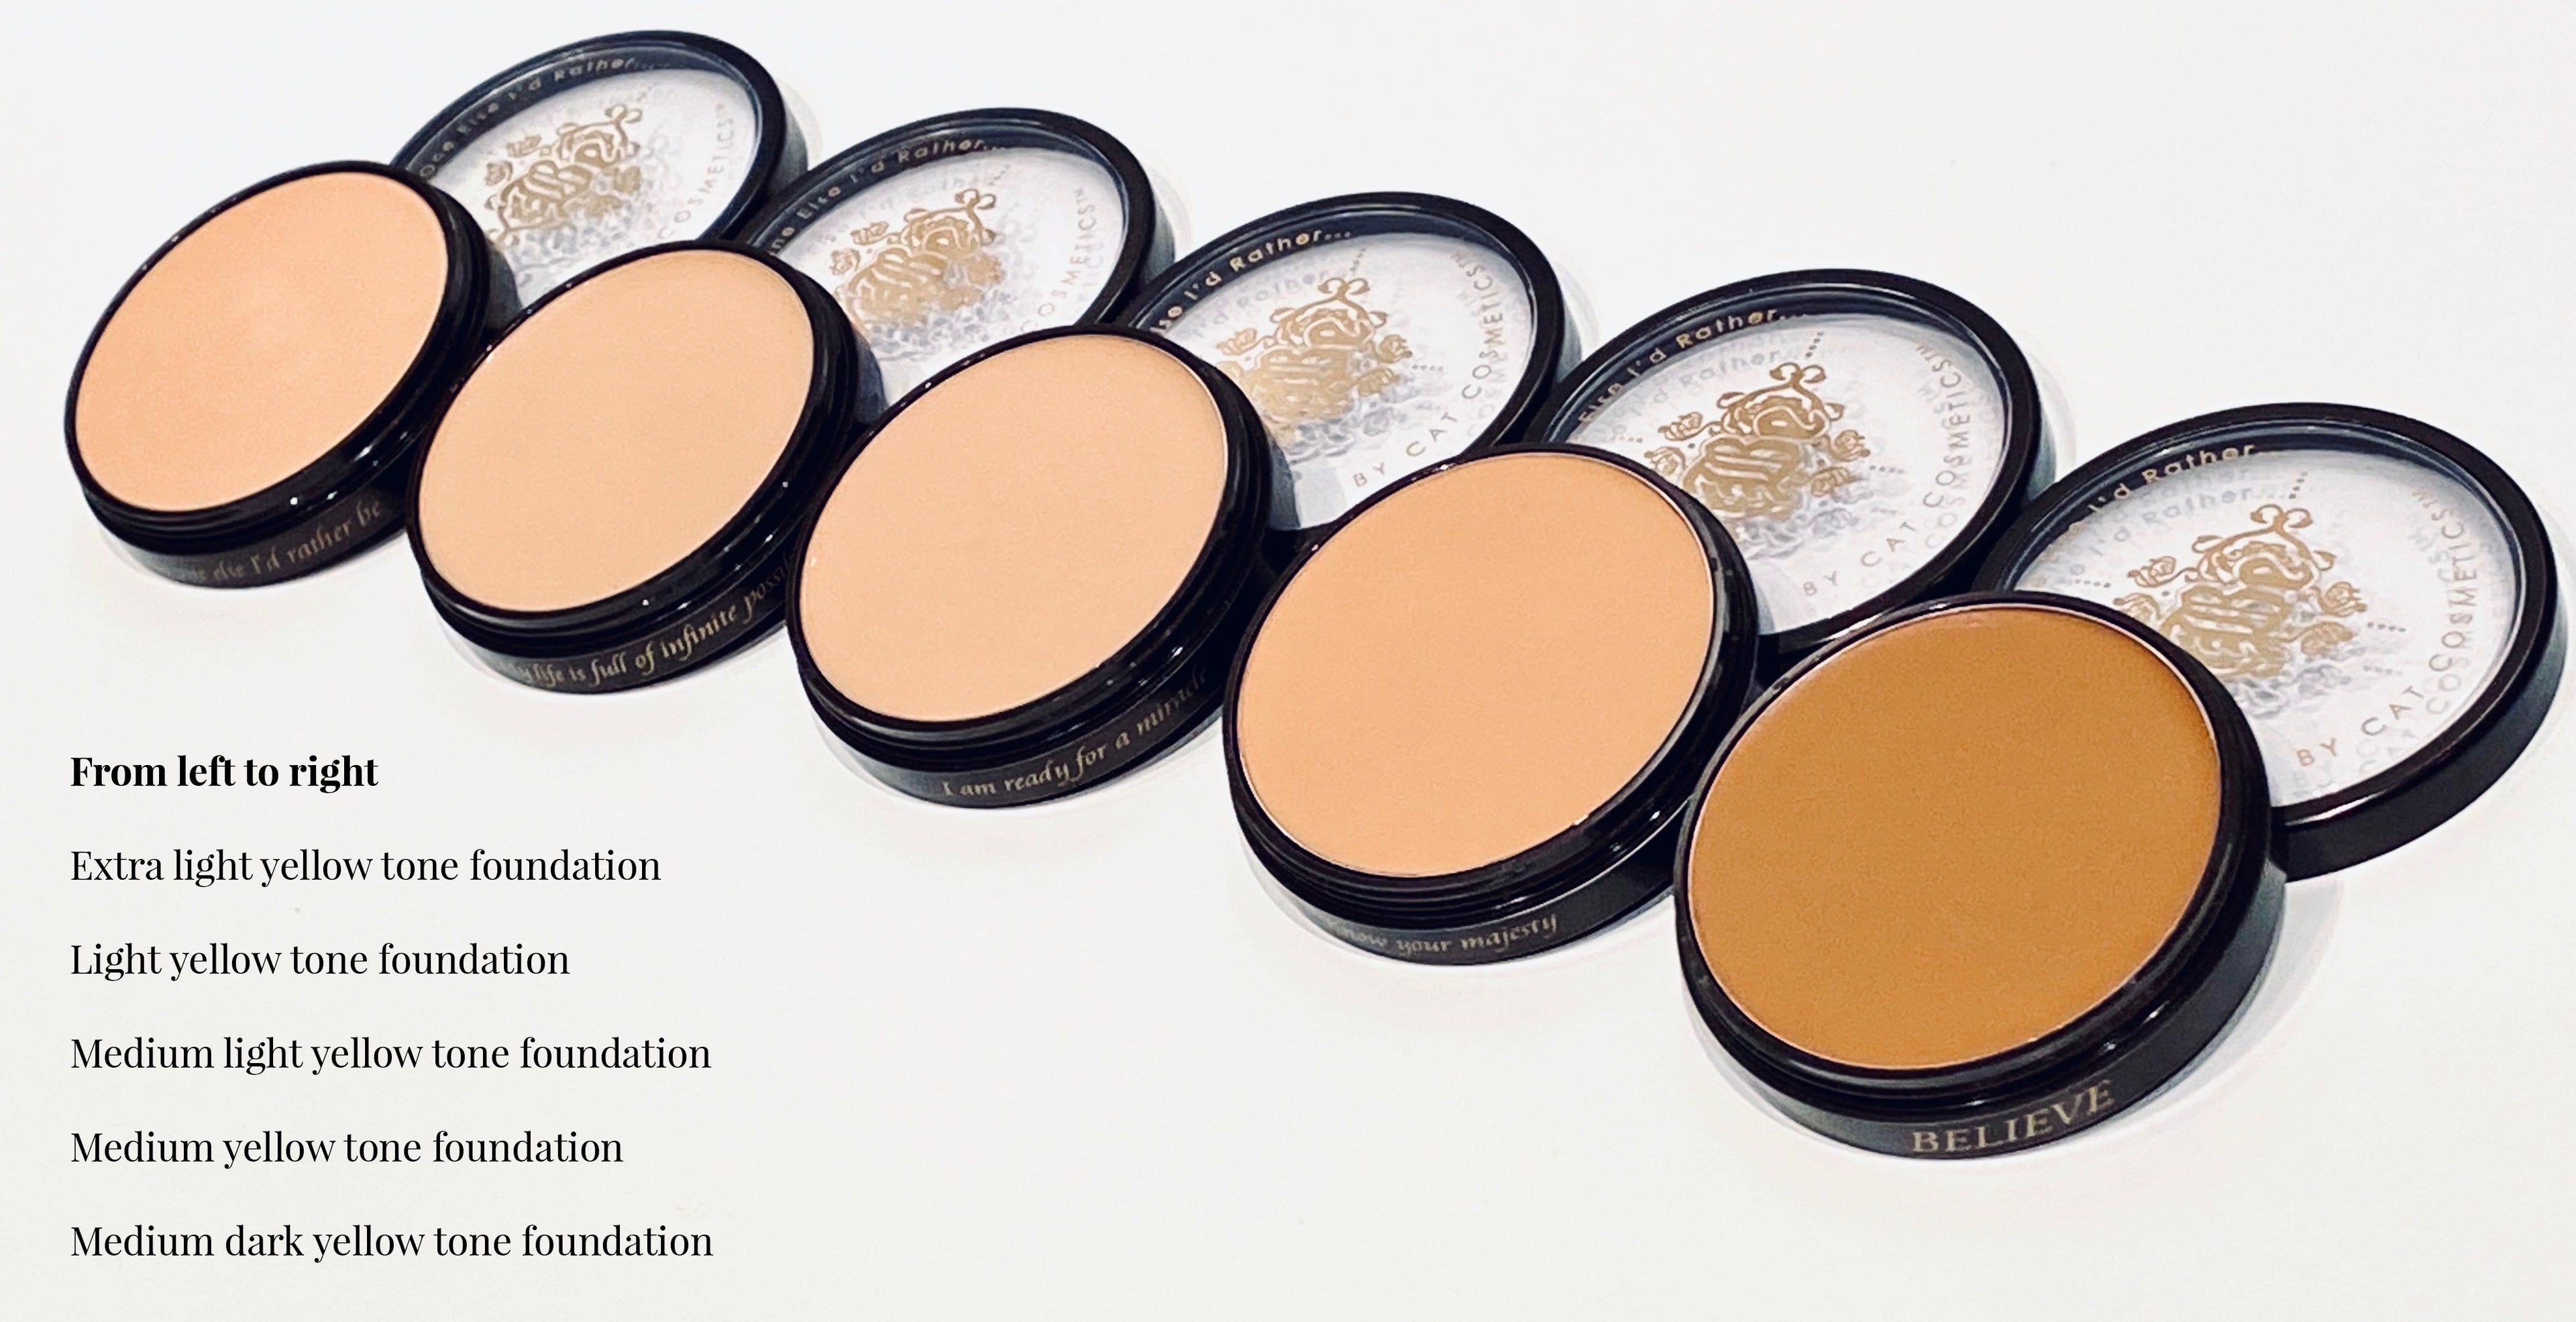 Skin Double Med-Light Yellow Tone Foundation Stack